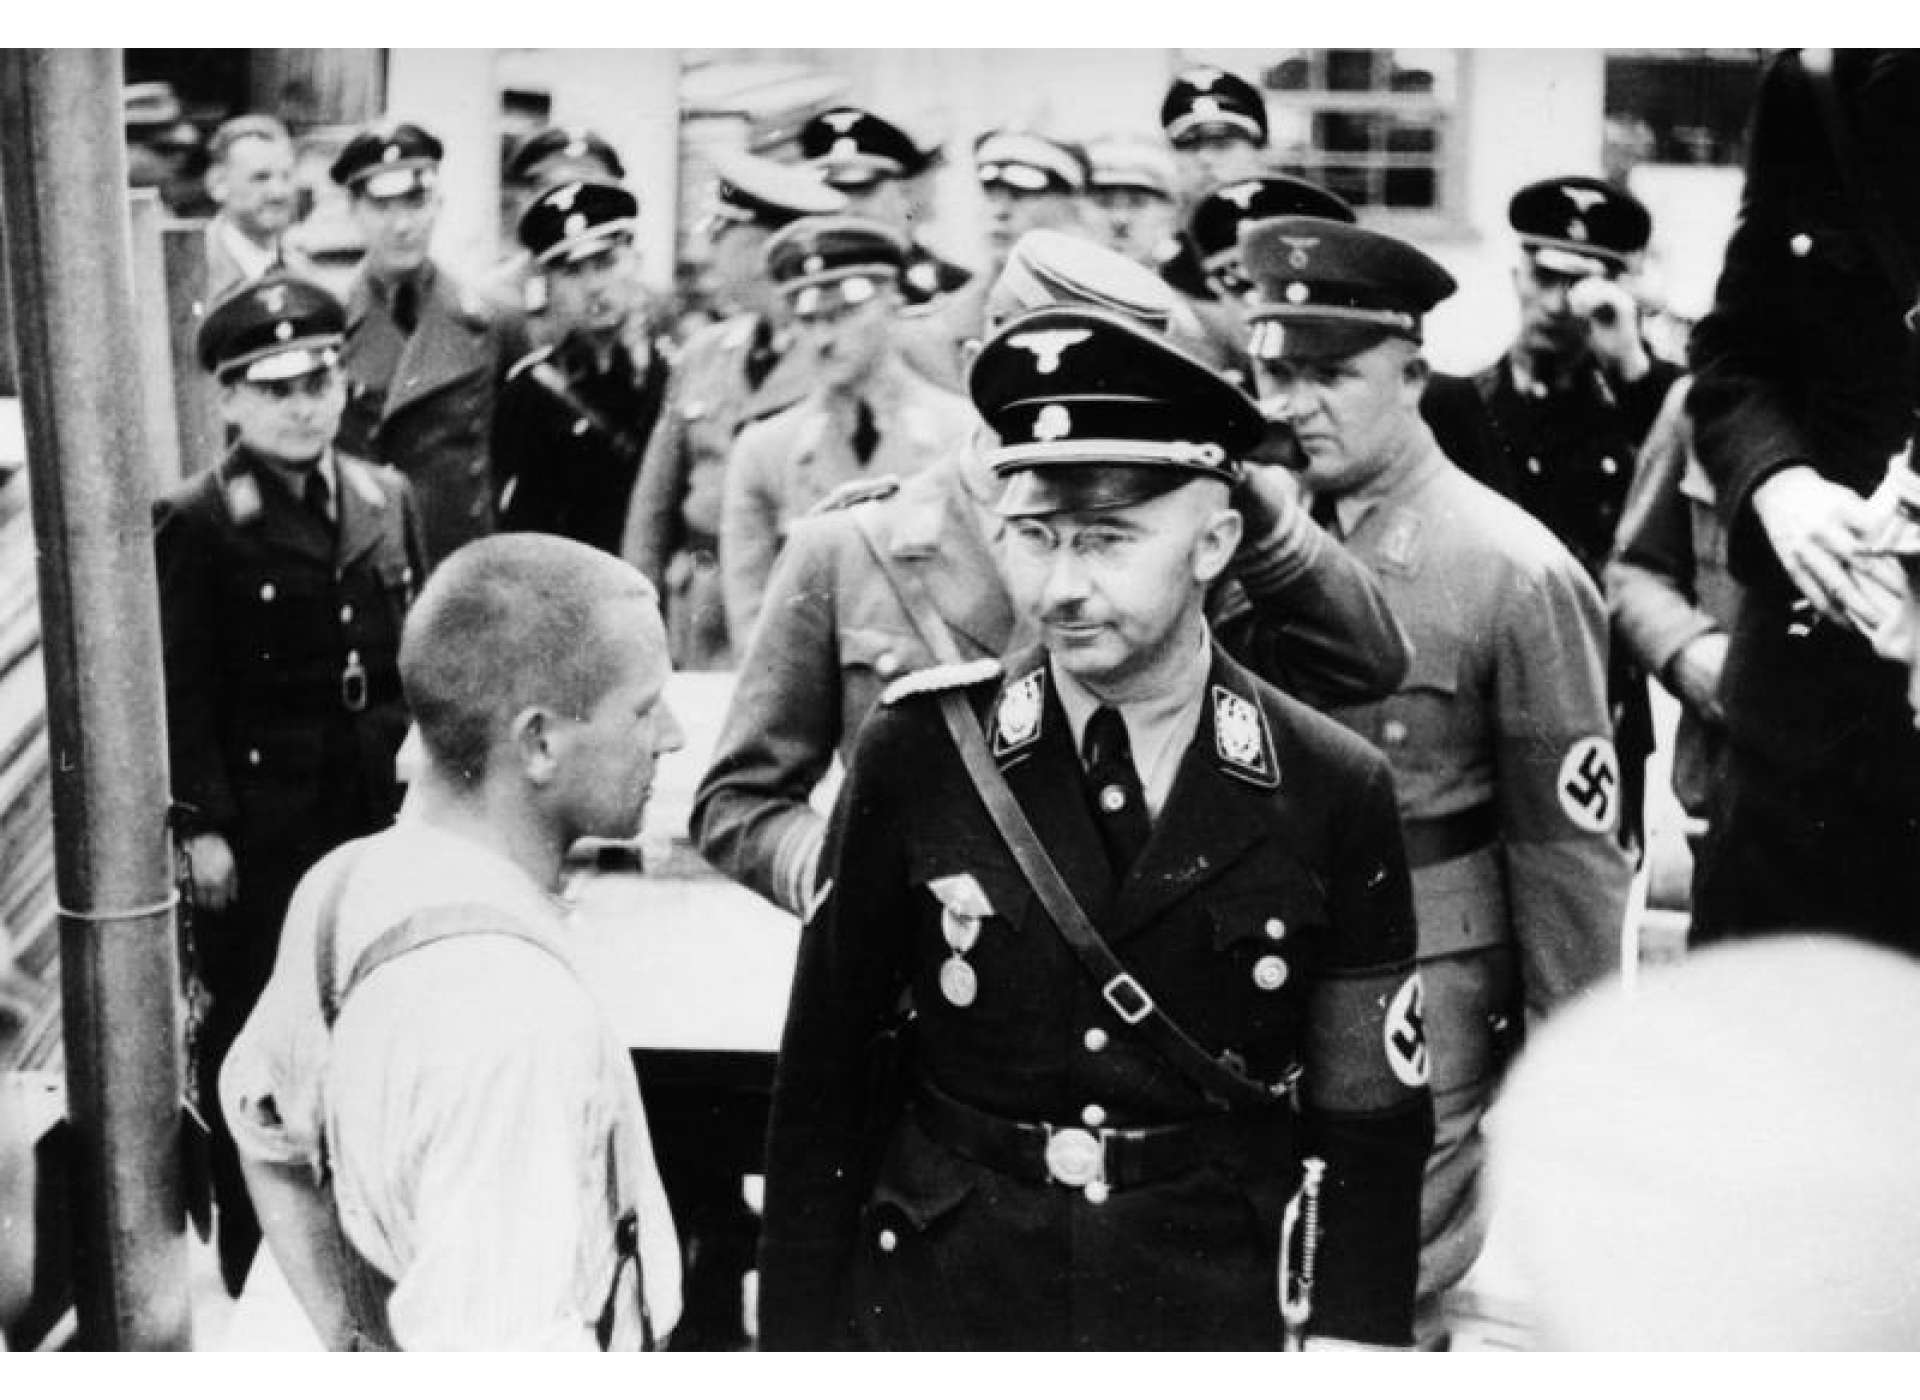 Heinrich Himmler, Head of the SS, inspecting the Dachau concentration camp in May 1936. Credit: Bundesarchiv Bild 152-11-12, Dachau, Konzentrationslager, Besuch Himmlers. Courtesy of Wikimedia Commons.